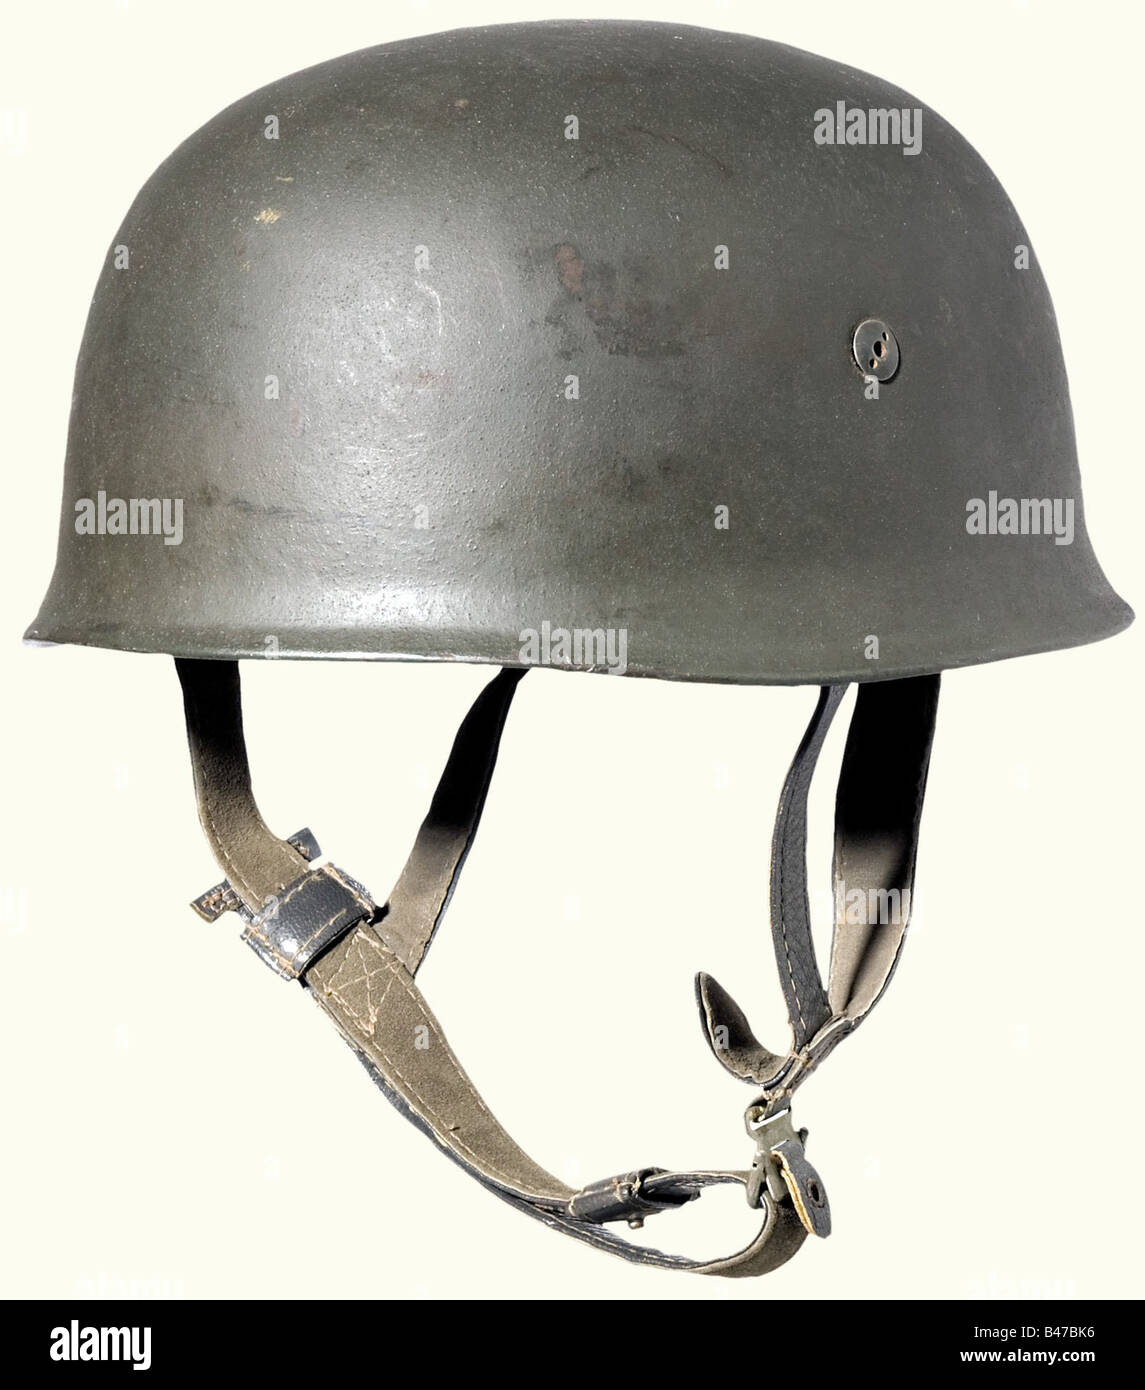 A steel helmet for paratroopers, 2nd model Rough, light blue/grey lacquer. Stamped on the inside. Aluminum inner ring with rubber cushioning. Grey blue leather straps and natural leather lining attached with four screws (two different versions). Stamped inside, 'Baumuster: Heisler Berlin 2', 'Hersteller: F.W. Müller Jr.', 'Kopfweite: Gr. 59' and 'Stahlhelm: Gr. 71'. (Production Model: Heisler Berlin 2', 'Made by: F.W. Müller Jr.', 'Head Size: 59' and 'Steel Helmet: Size 71'). Very good, nearly unworn condition. historic, historical, 1930s, 1930s, 20th century, , Stock Photo